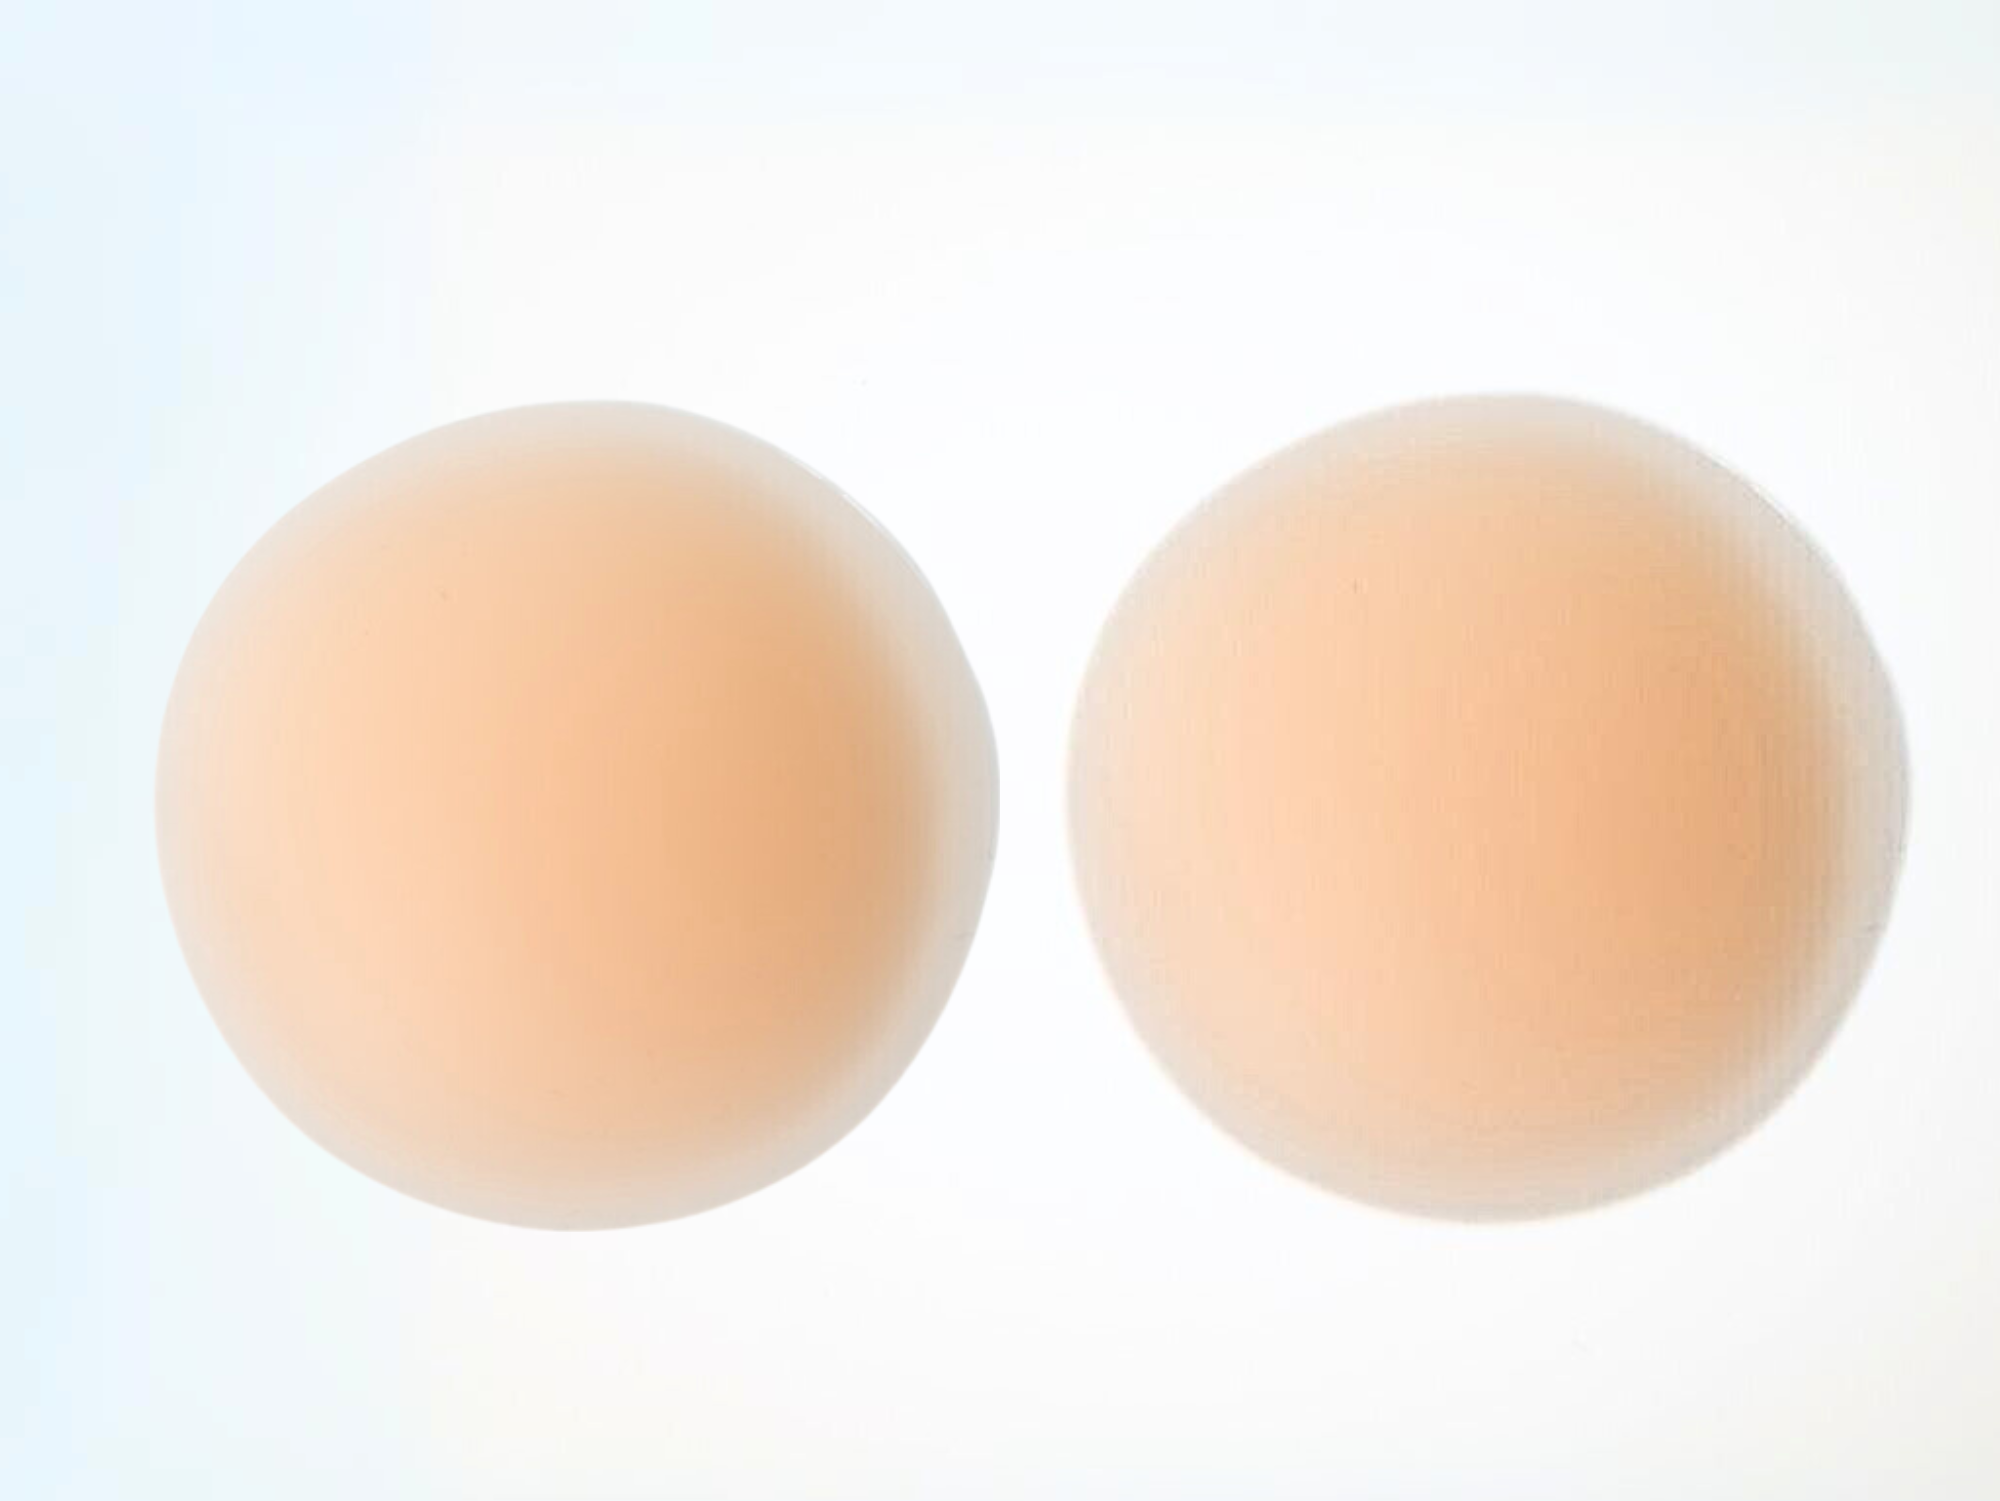 A pair of pinkish skin tone pasties for braless looks and hyperactive or sensitive nipples.